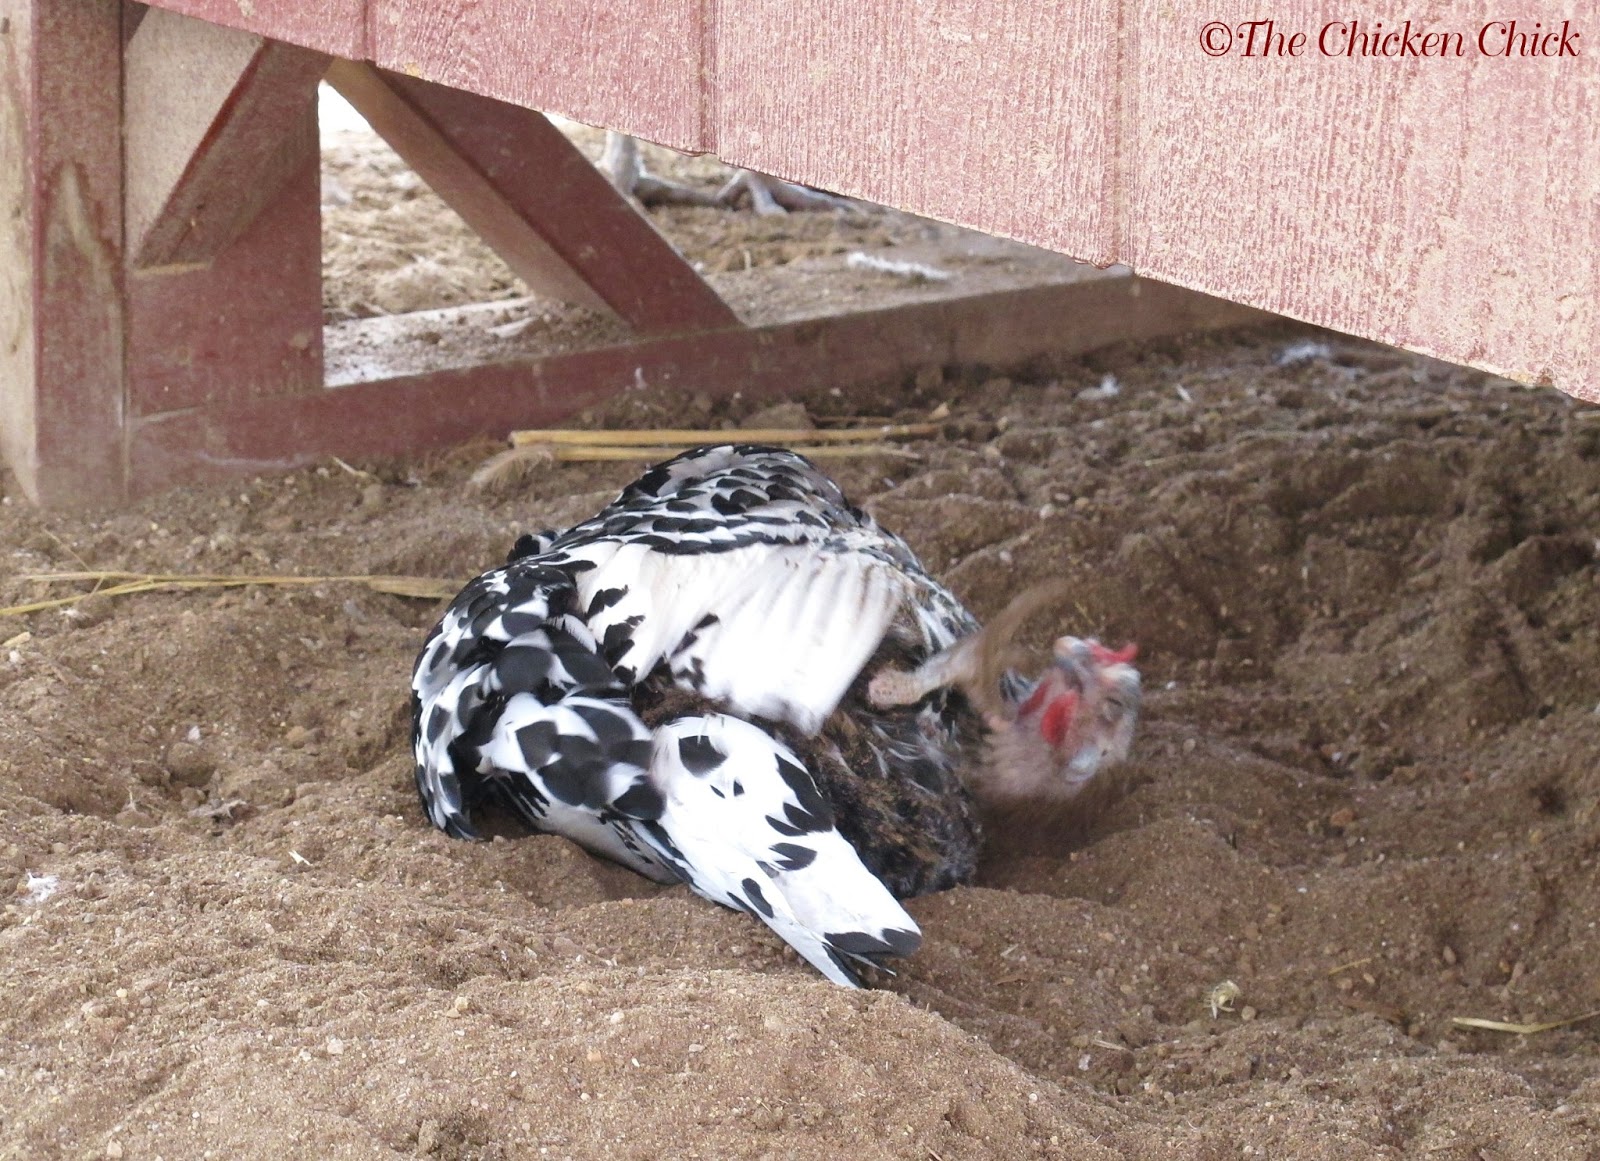 Winter dust bath in the sand, under the coop. As long as the sand ...